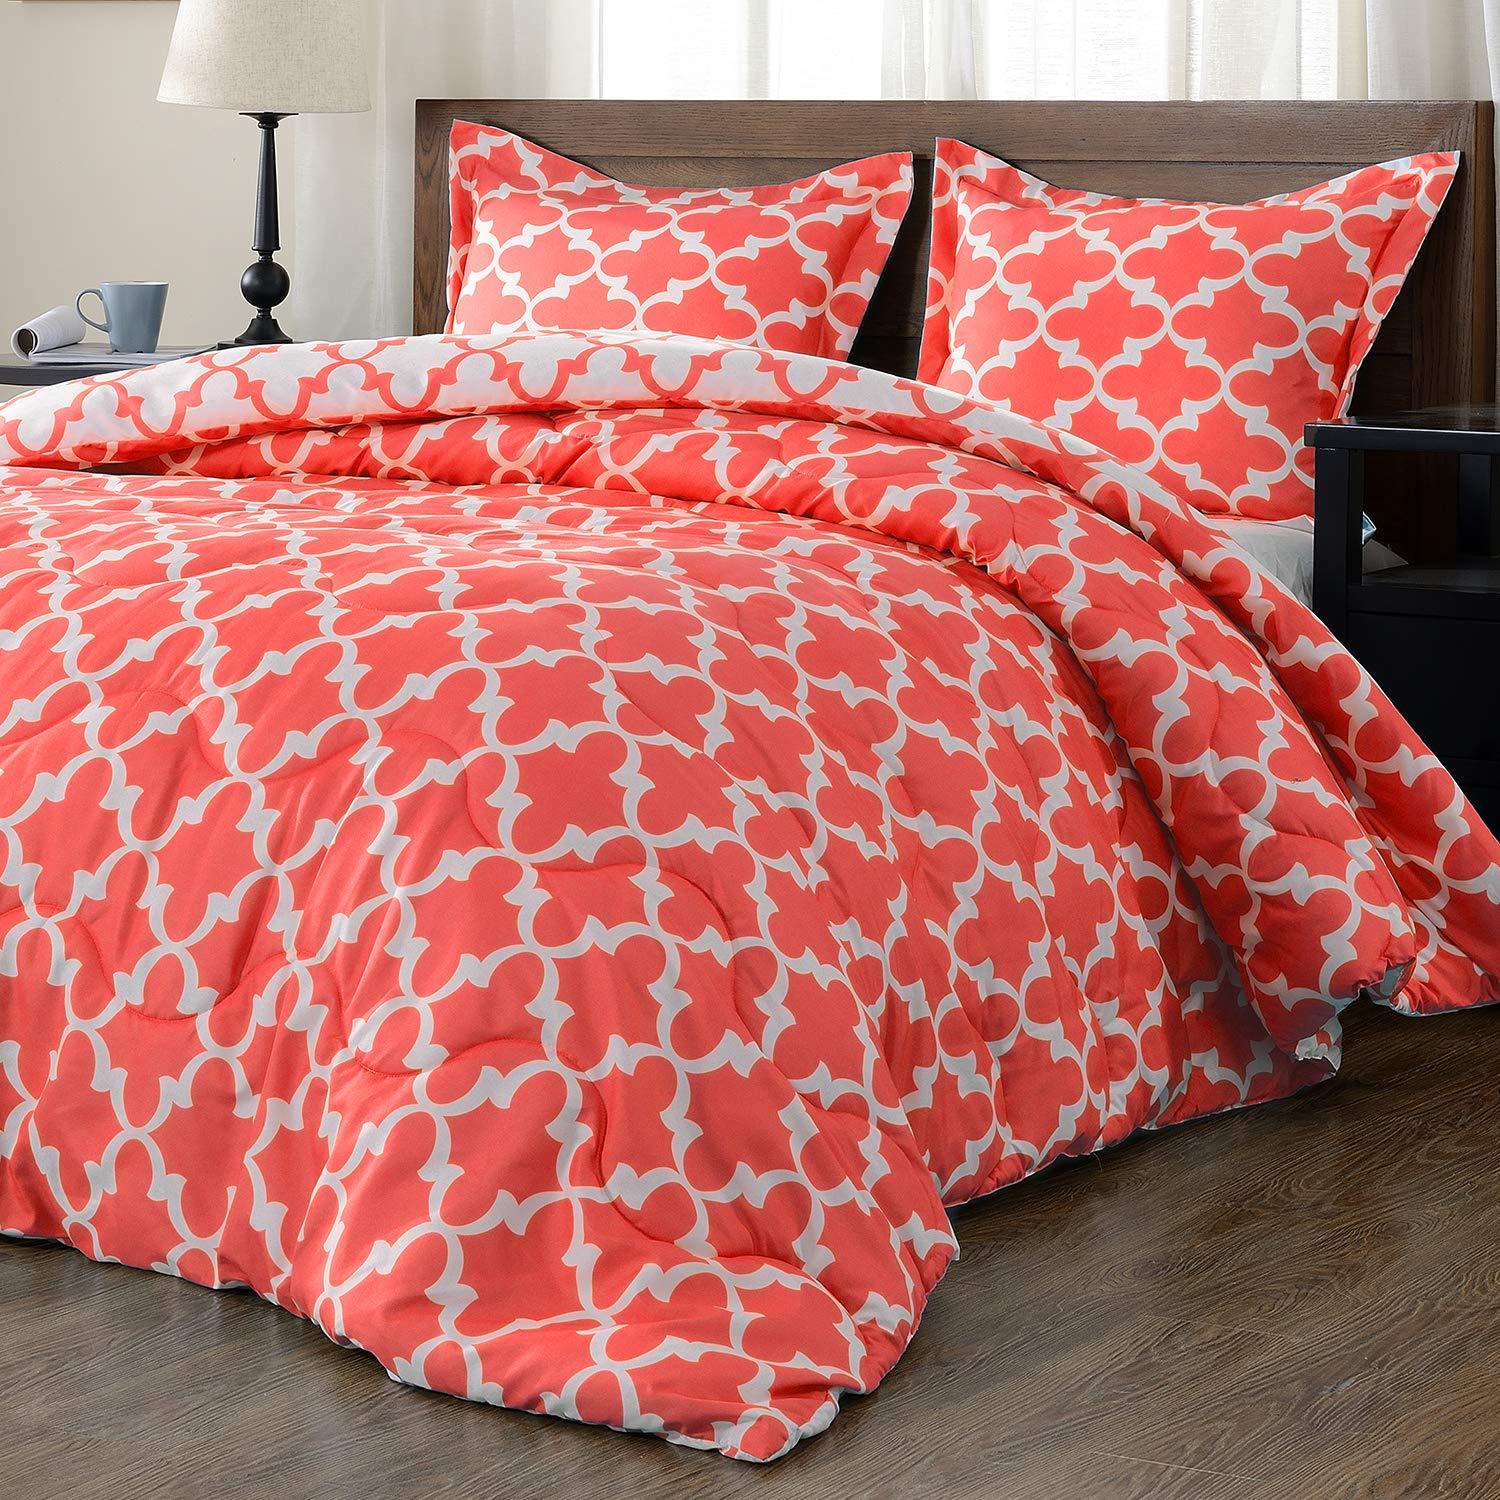 Book Cover downluxe Lightweight Printed Comforter Set (King, Coral) with 2 Pillow Shams - 3-Piece Set - Down Alternative Reversible Comforter